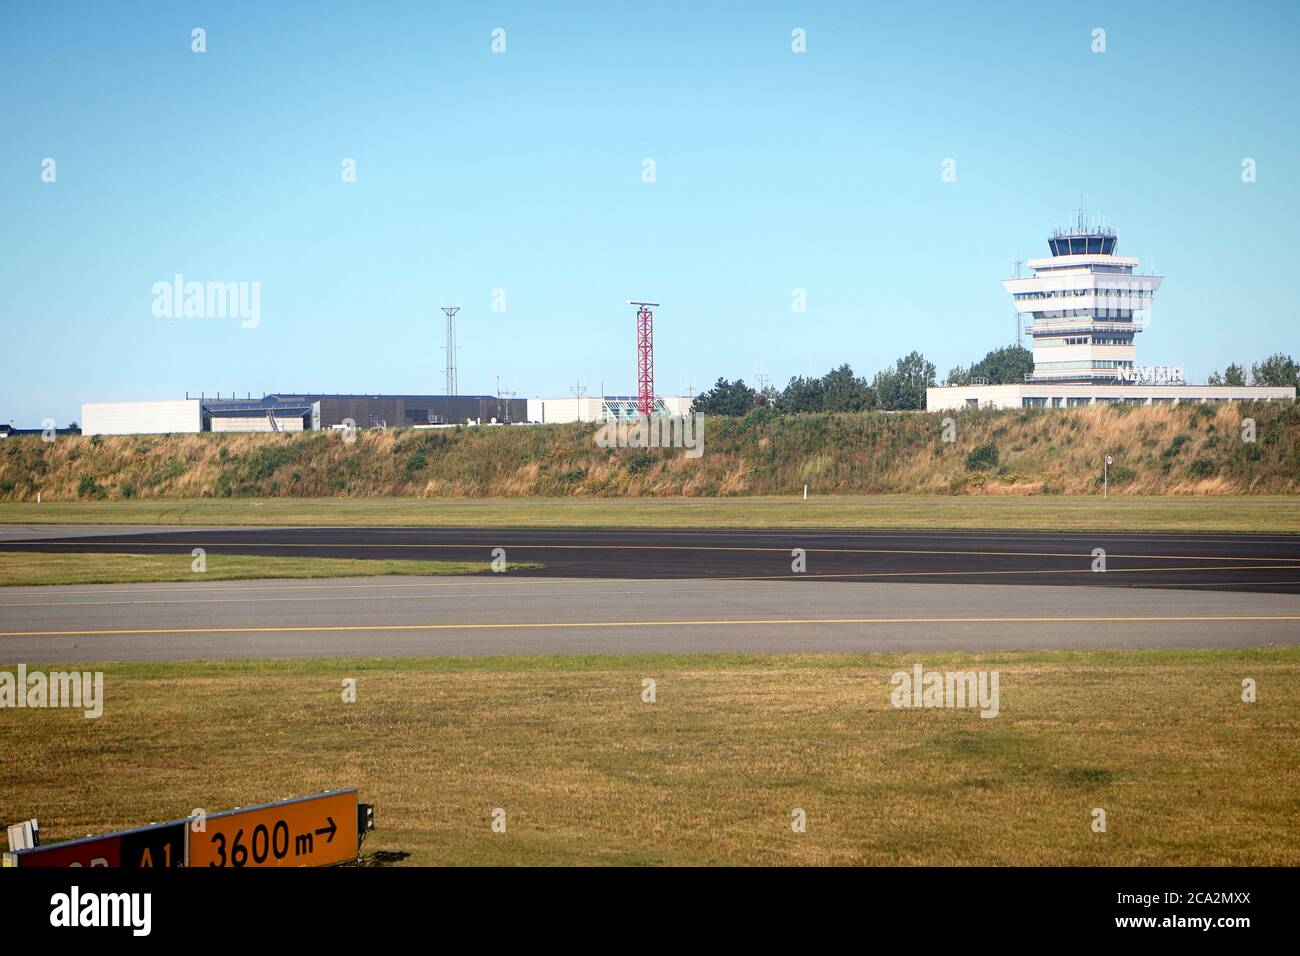 Denmark, Copenhagen airport:view of the airfield with the control tower and empty runways at coronavirus time Stock Photo